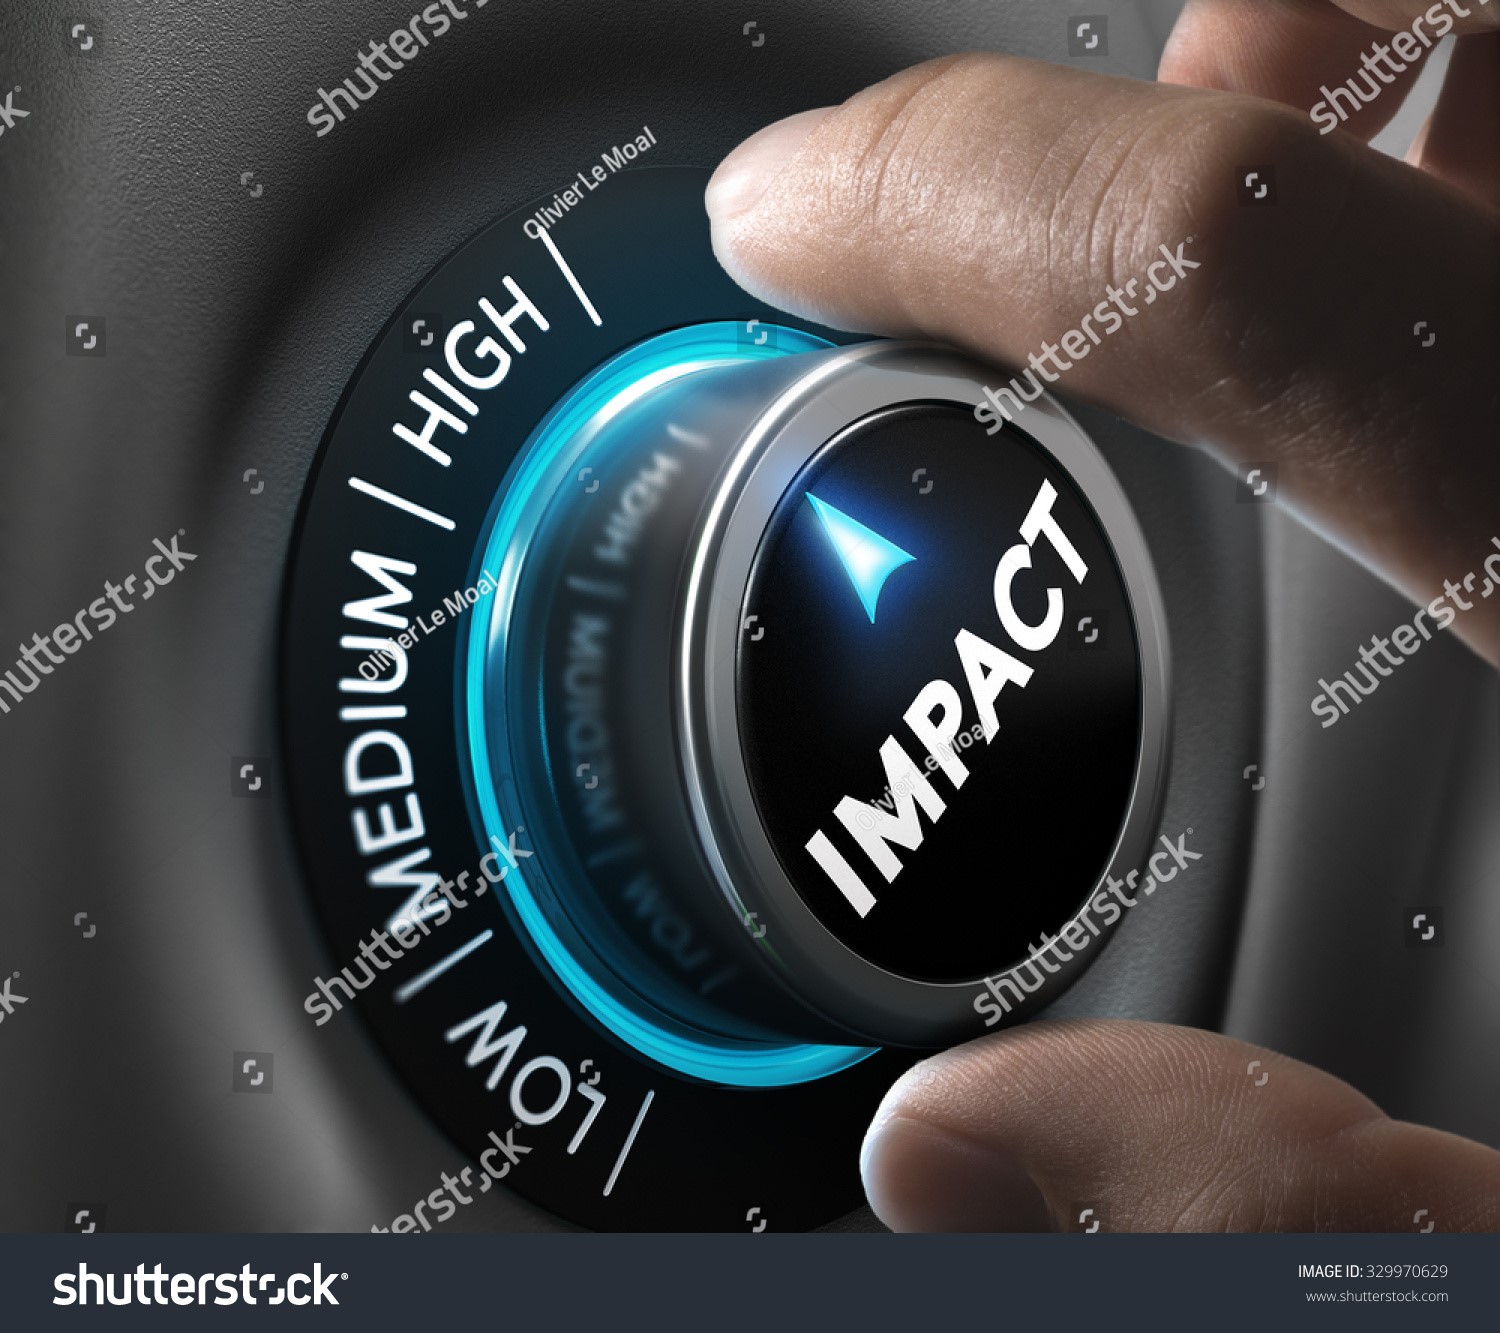 stock-photo-man-hand-turning-a-knob-in-the-highest-position-concept-image-for-illustration-of-high-impact-329970629